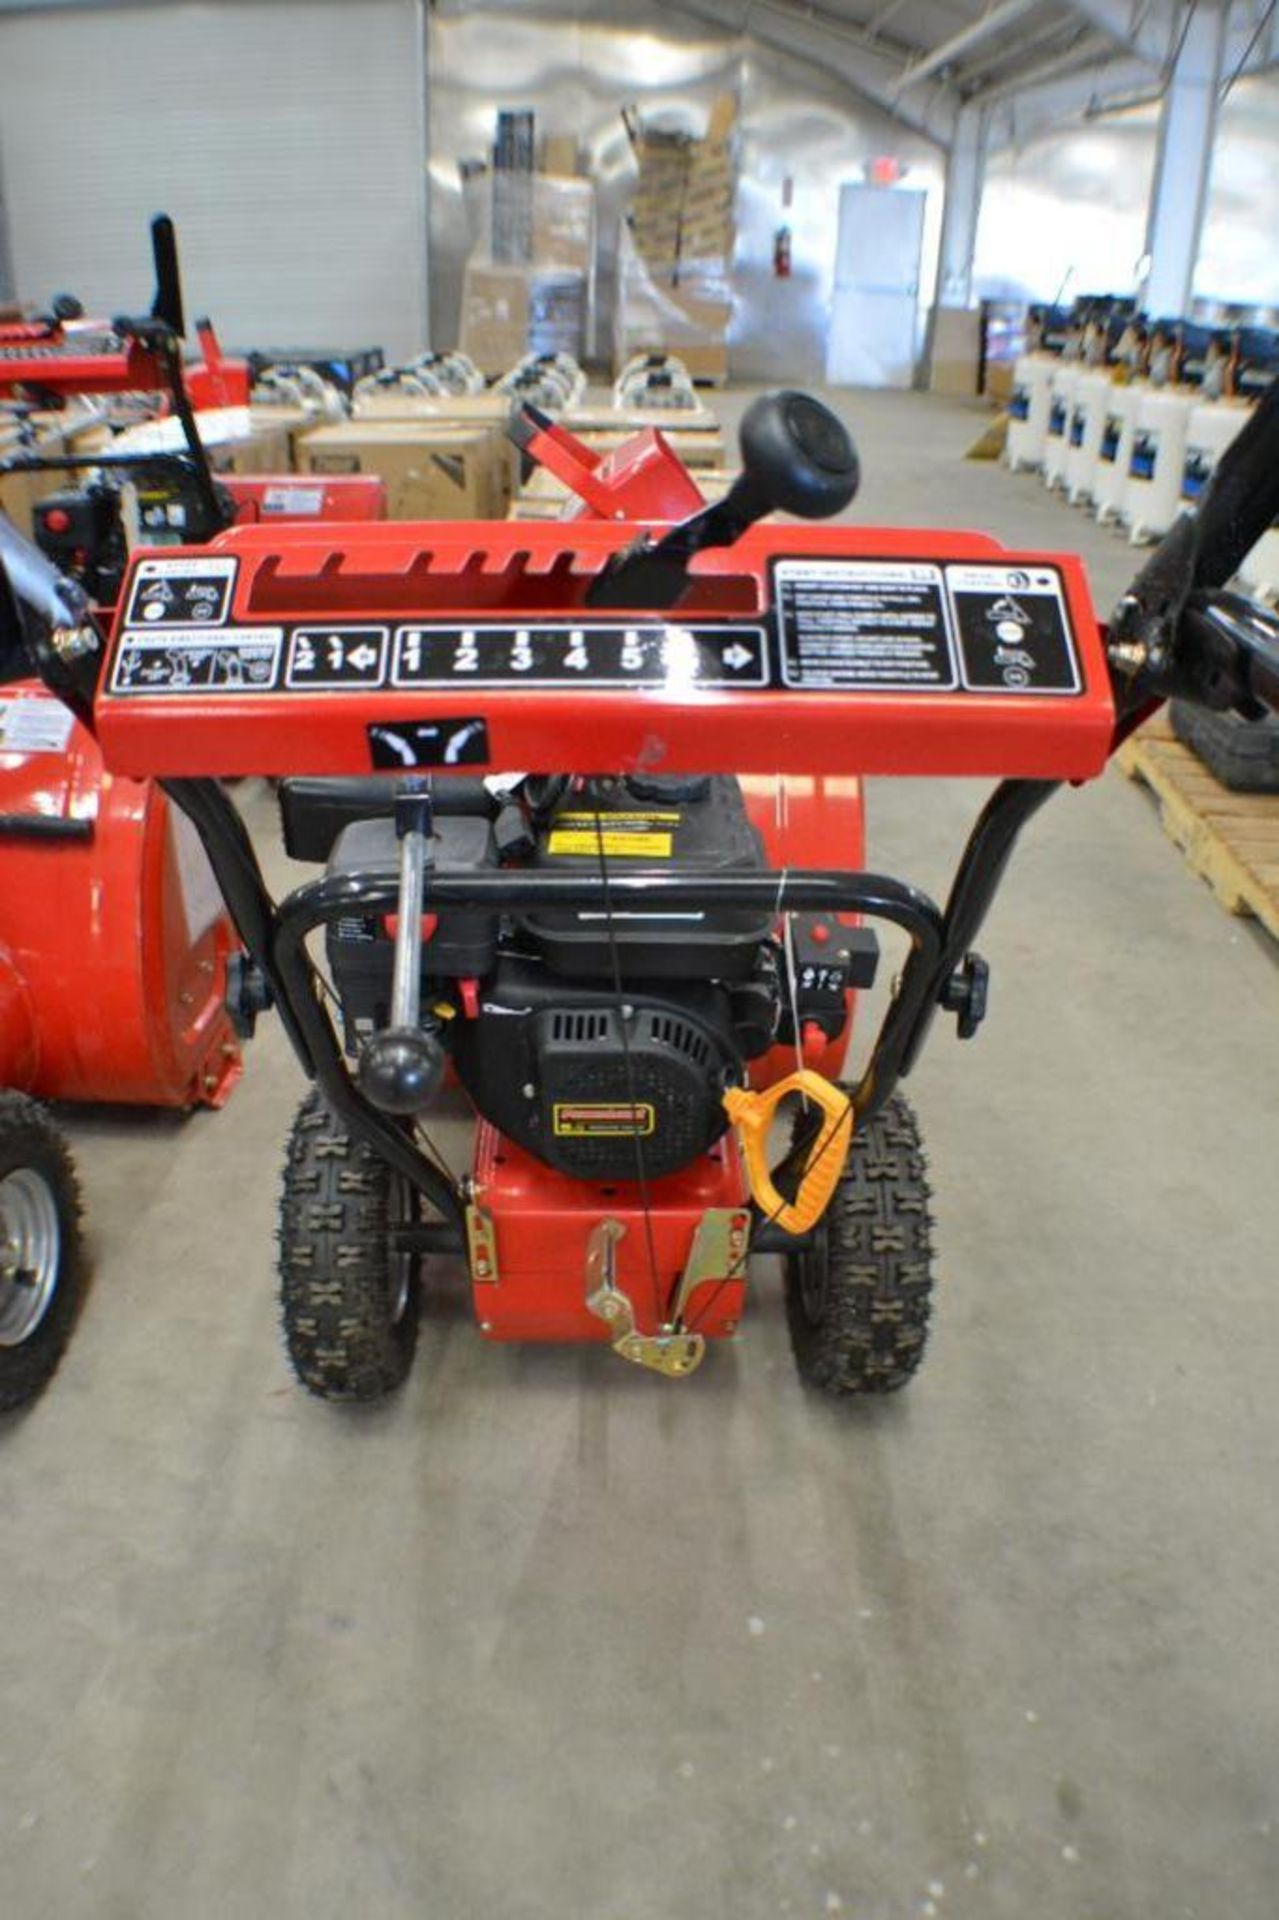 Snow Thrower 24in. 6.5HP with electric Start Engine 4 Stroke by Powerland - Image 6 of 6